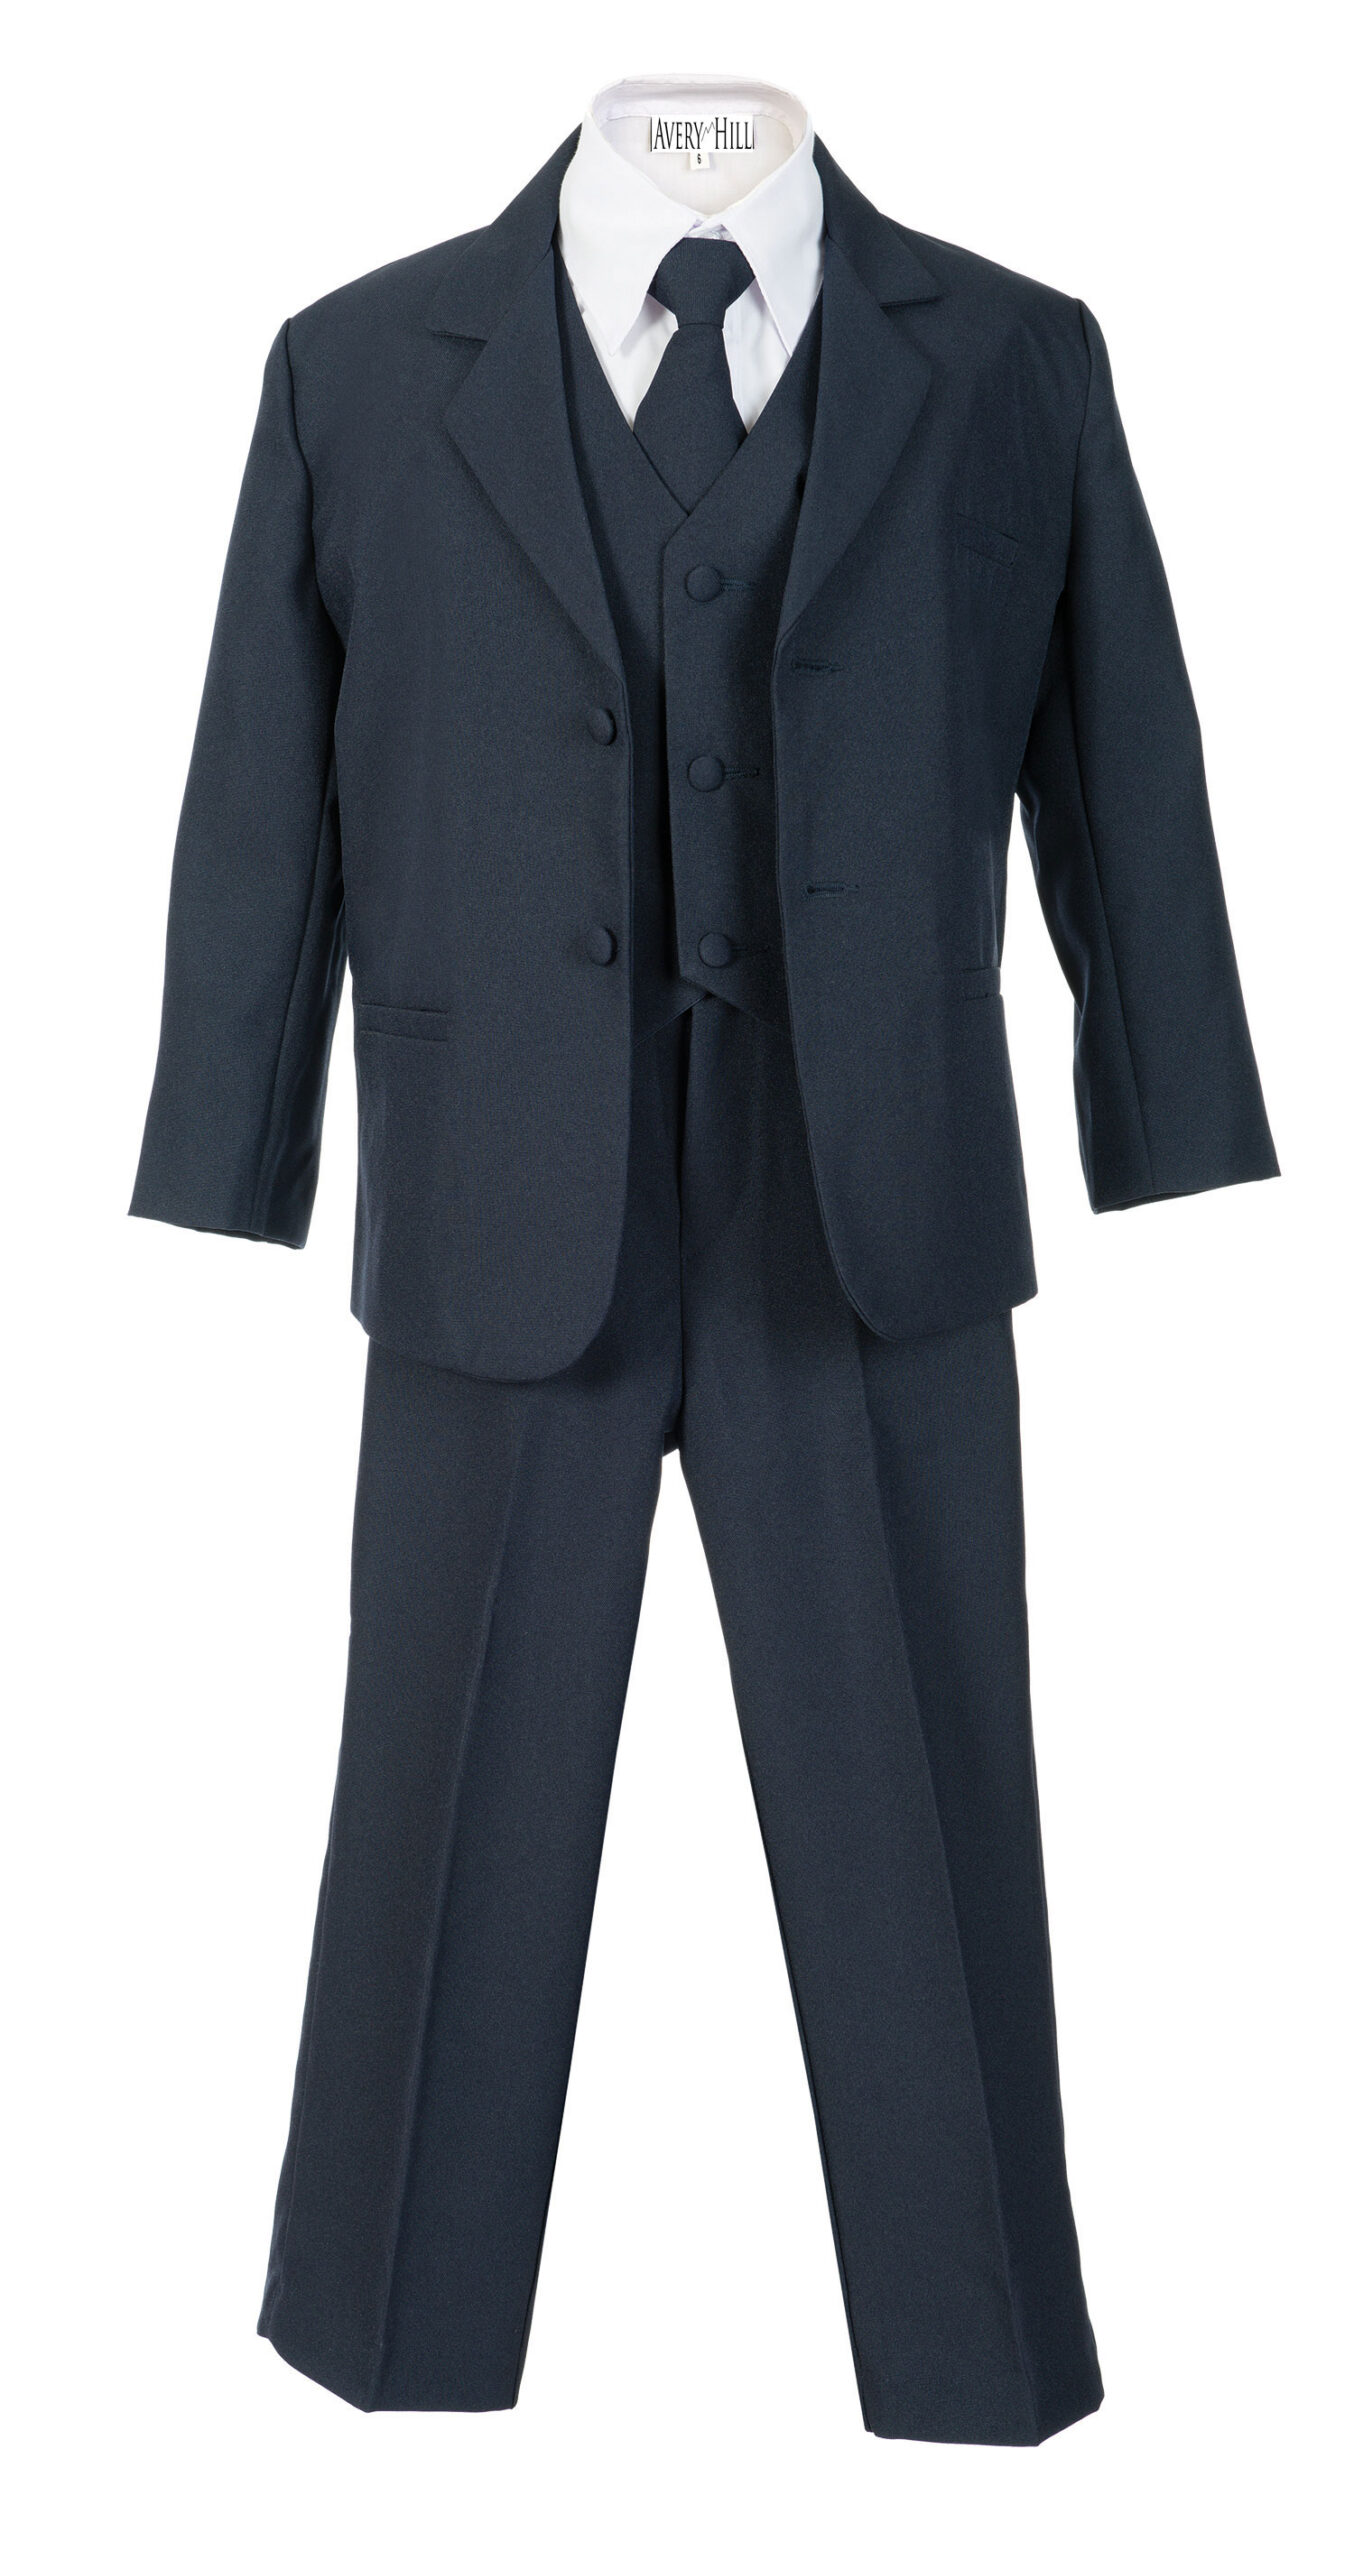 Avery Hill Boys Formal 5 Piece Suit with Shirt and Vest Navy - 3T